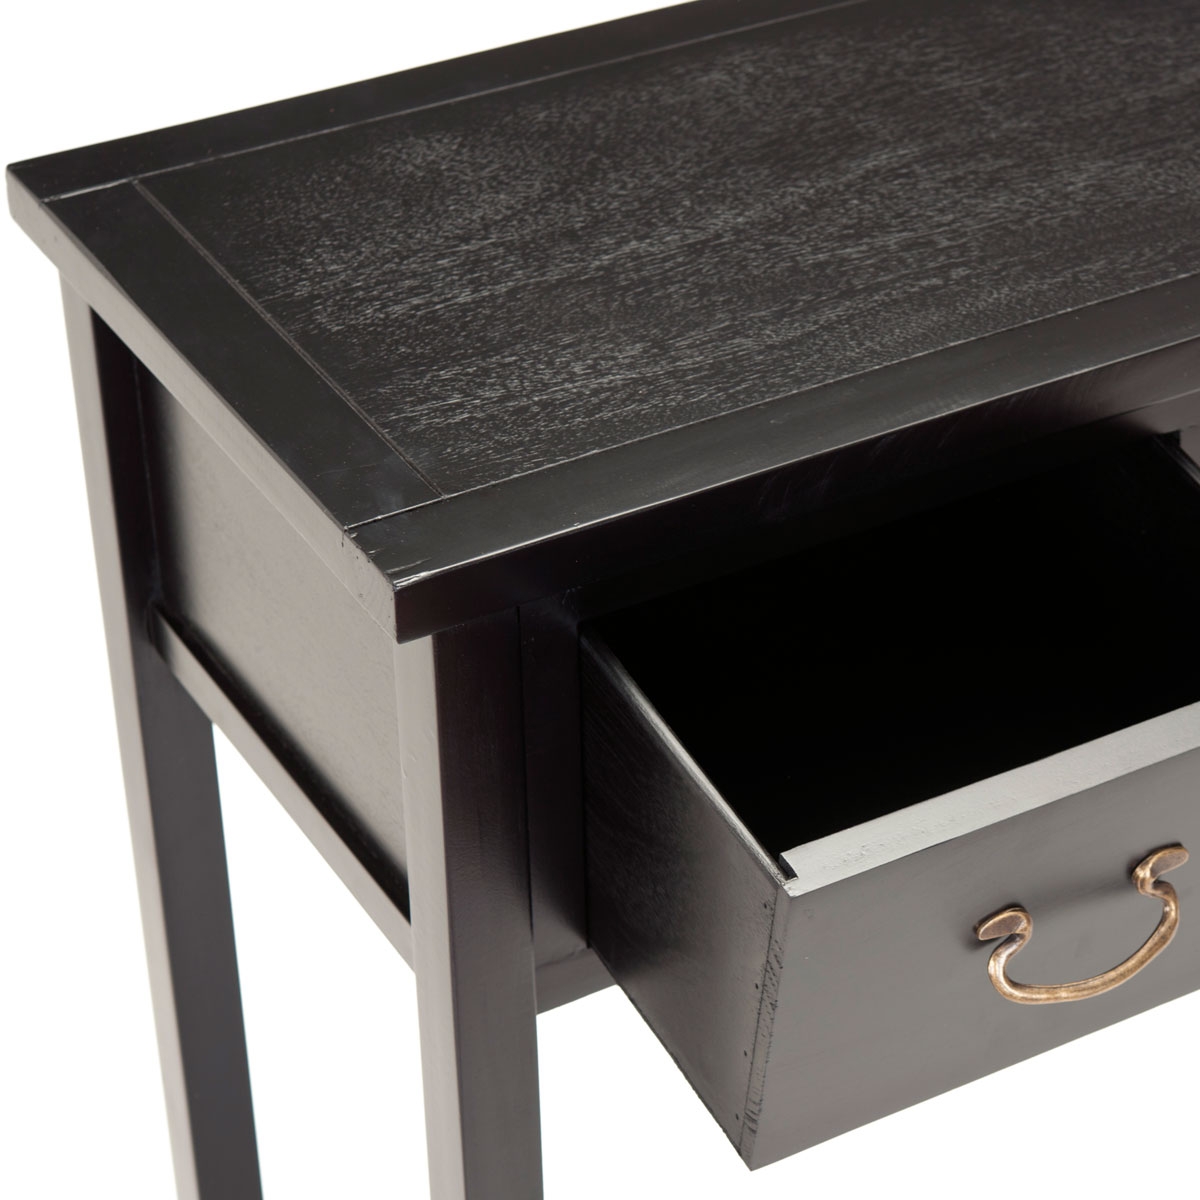 Cindy Console With Storage Drawers - Black - Arlo Home - Image 2